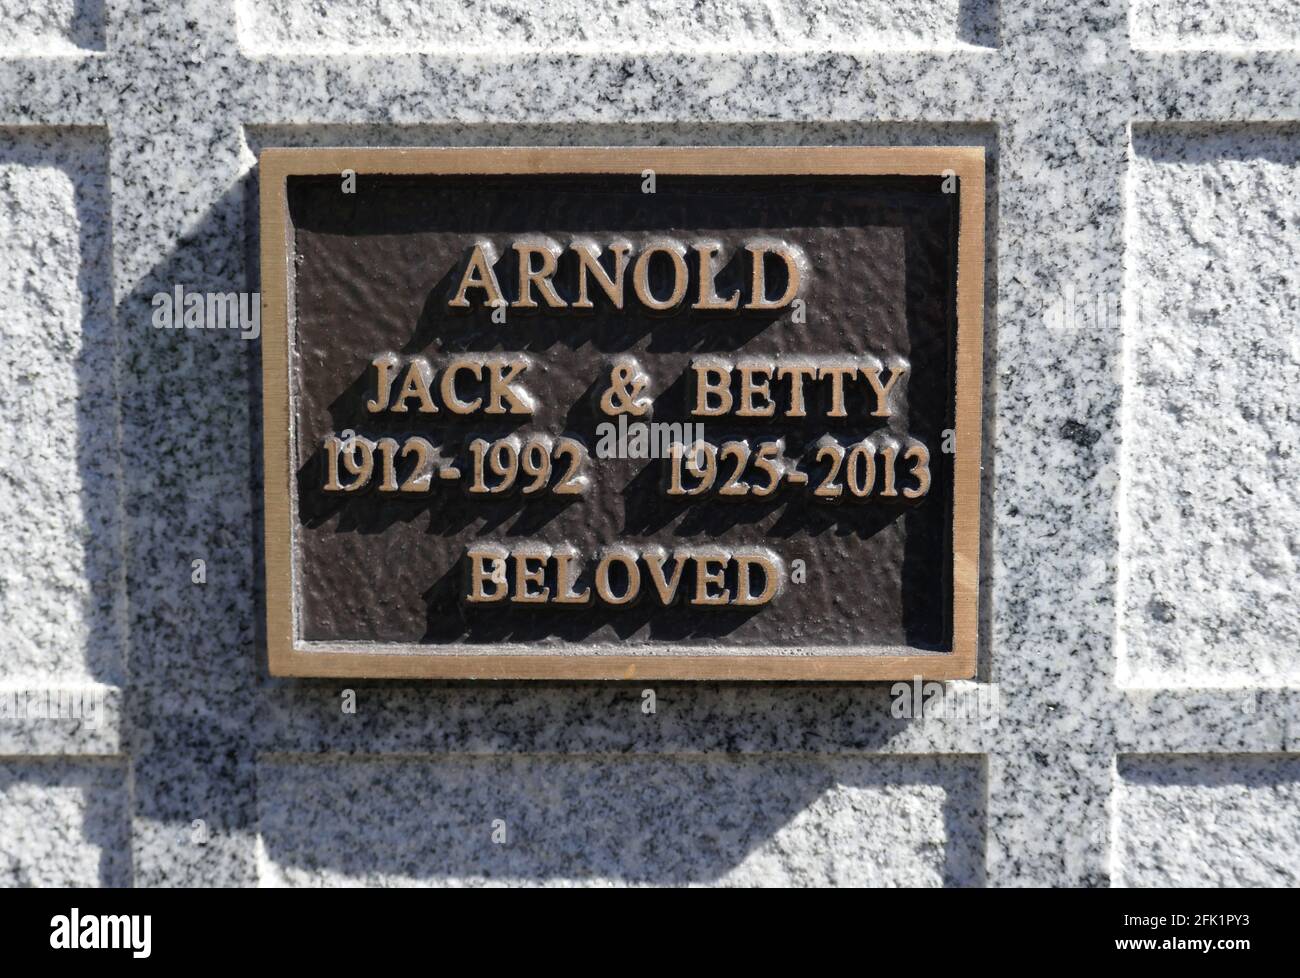 Los Angeles, California, USA 26th April 2021 A general view of atmosphere of director Jack Arnold's grave at Pierce Brothers Westwood Village Memorial Park on April 26, 2020 in Los Angeles, California, USA. He directed many movies including The Creature From The Black Lagoon, The Incredible Shrinking Man, Tarantula, Revenge of the Creature, It Came From Outer Space. Photo by Barry King/Alamy Stock Photo Stock Photo